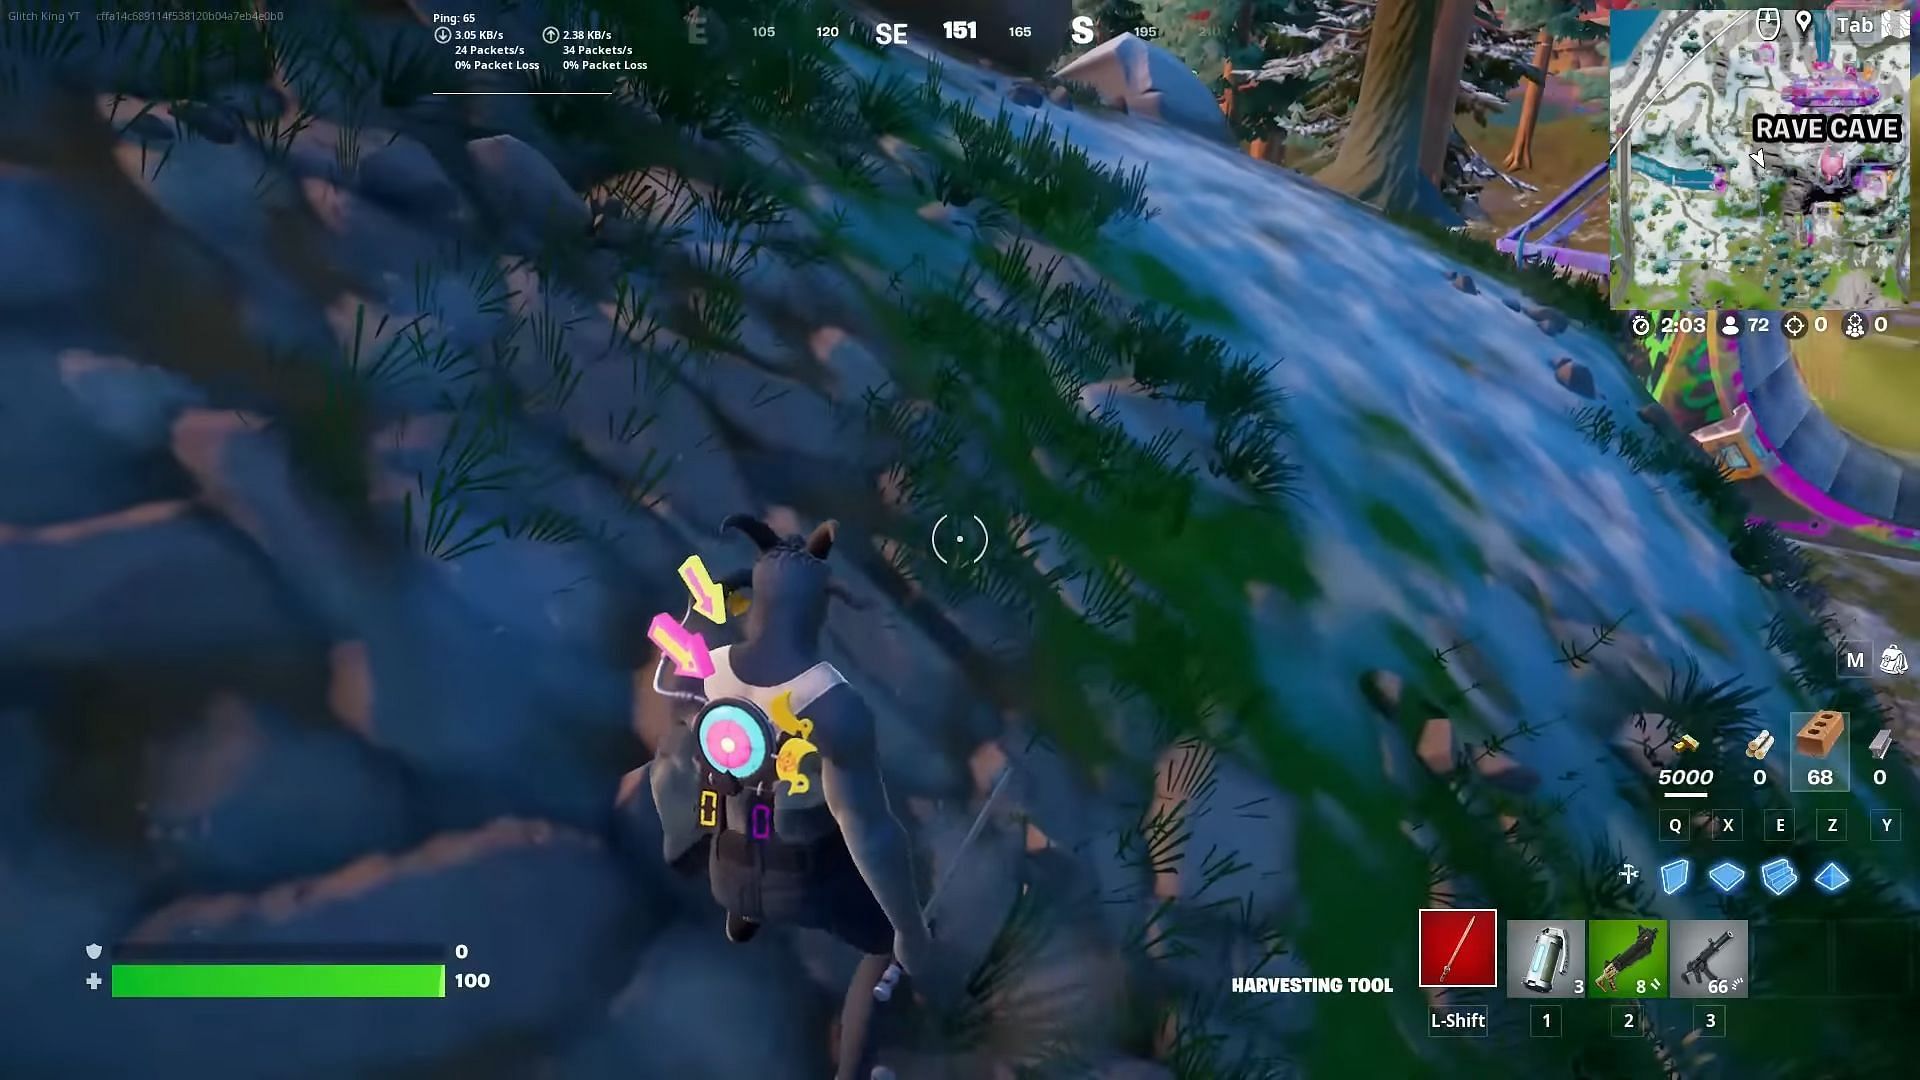 The Fortnite glitch teleports players to another location (Image via Epic Games)